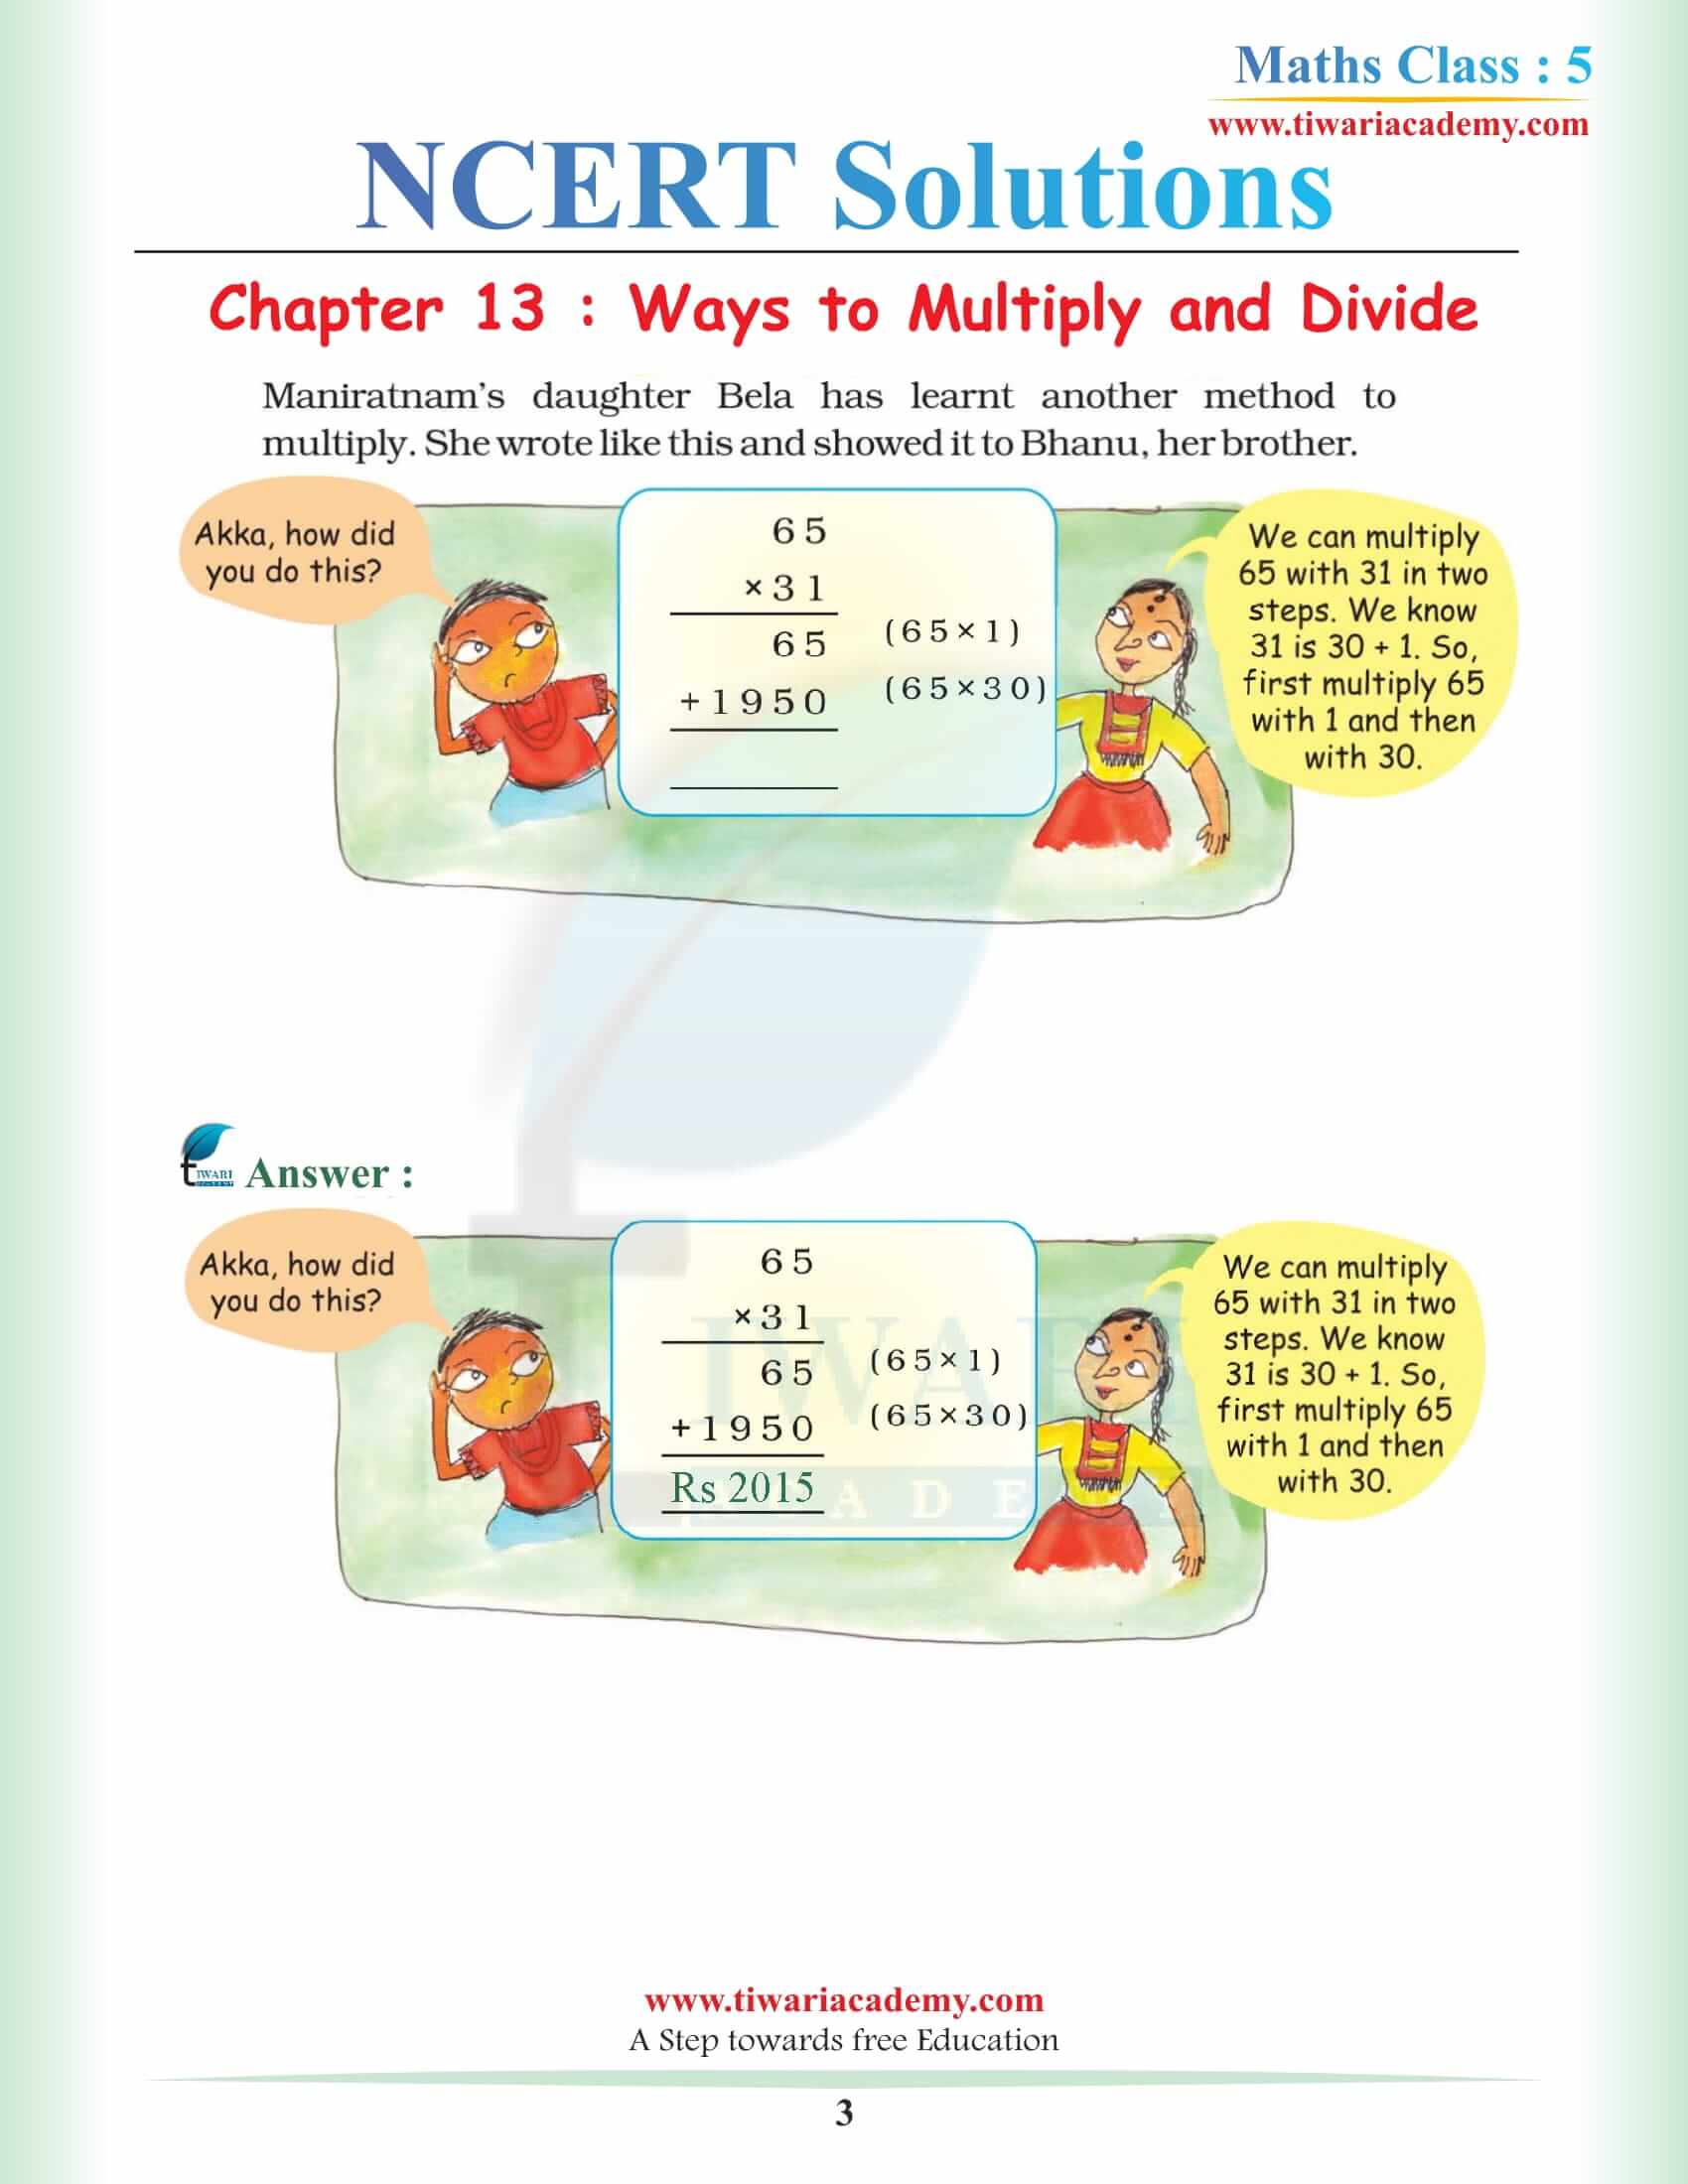 NCERT Solutions for Class 5 Maths Chapter 13 free download